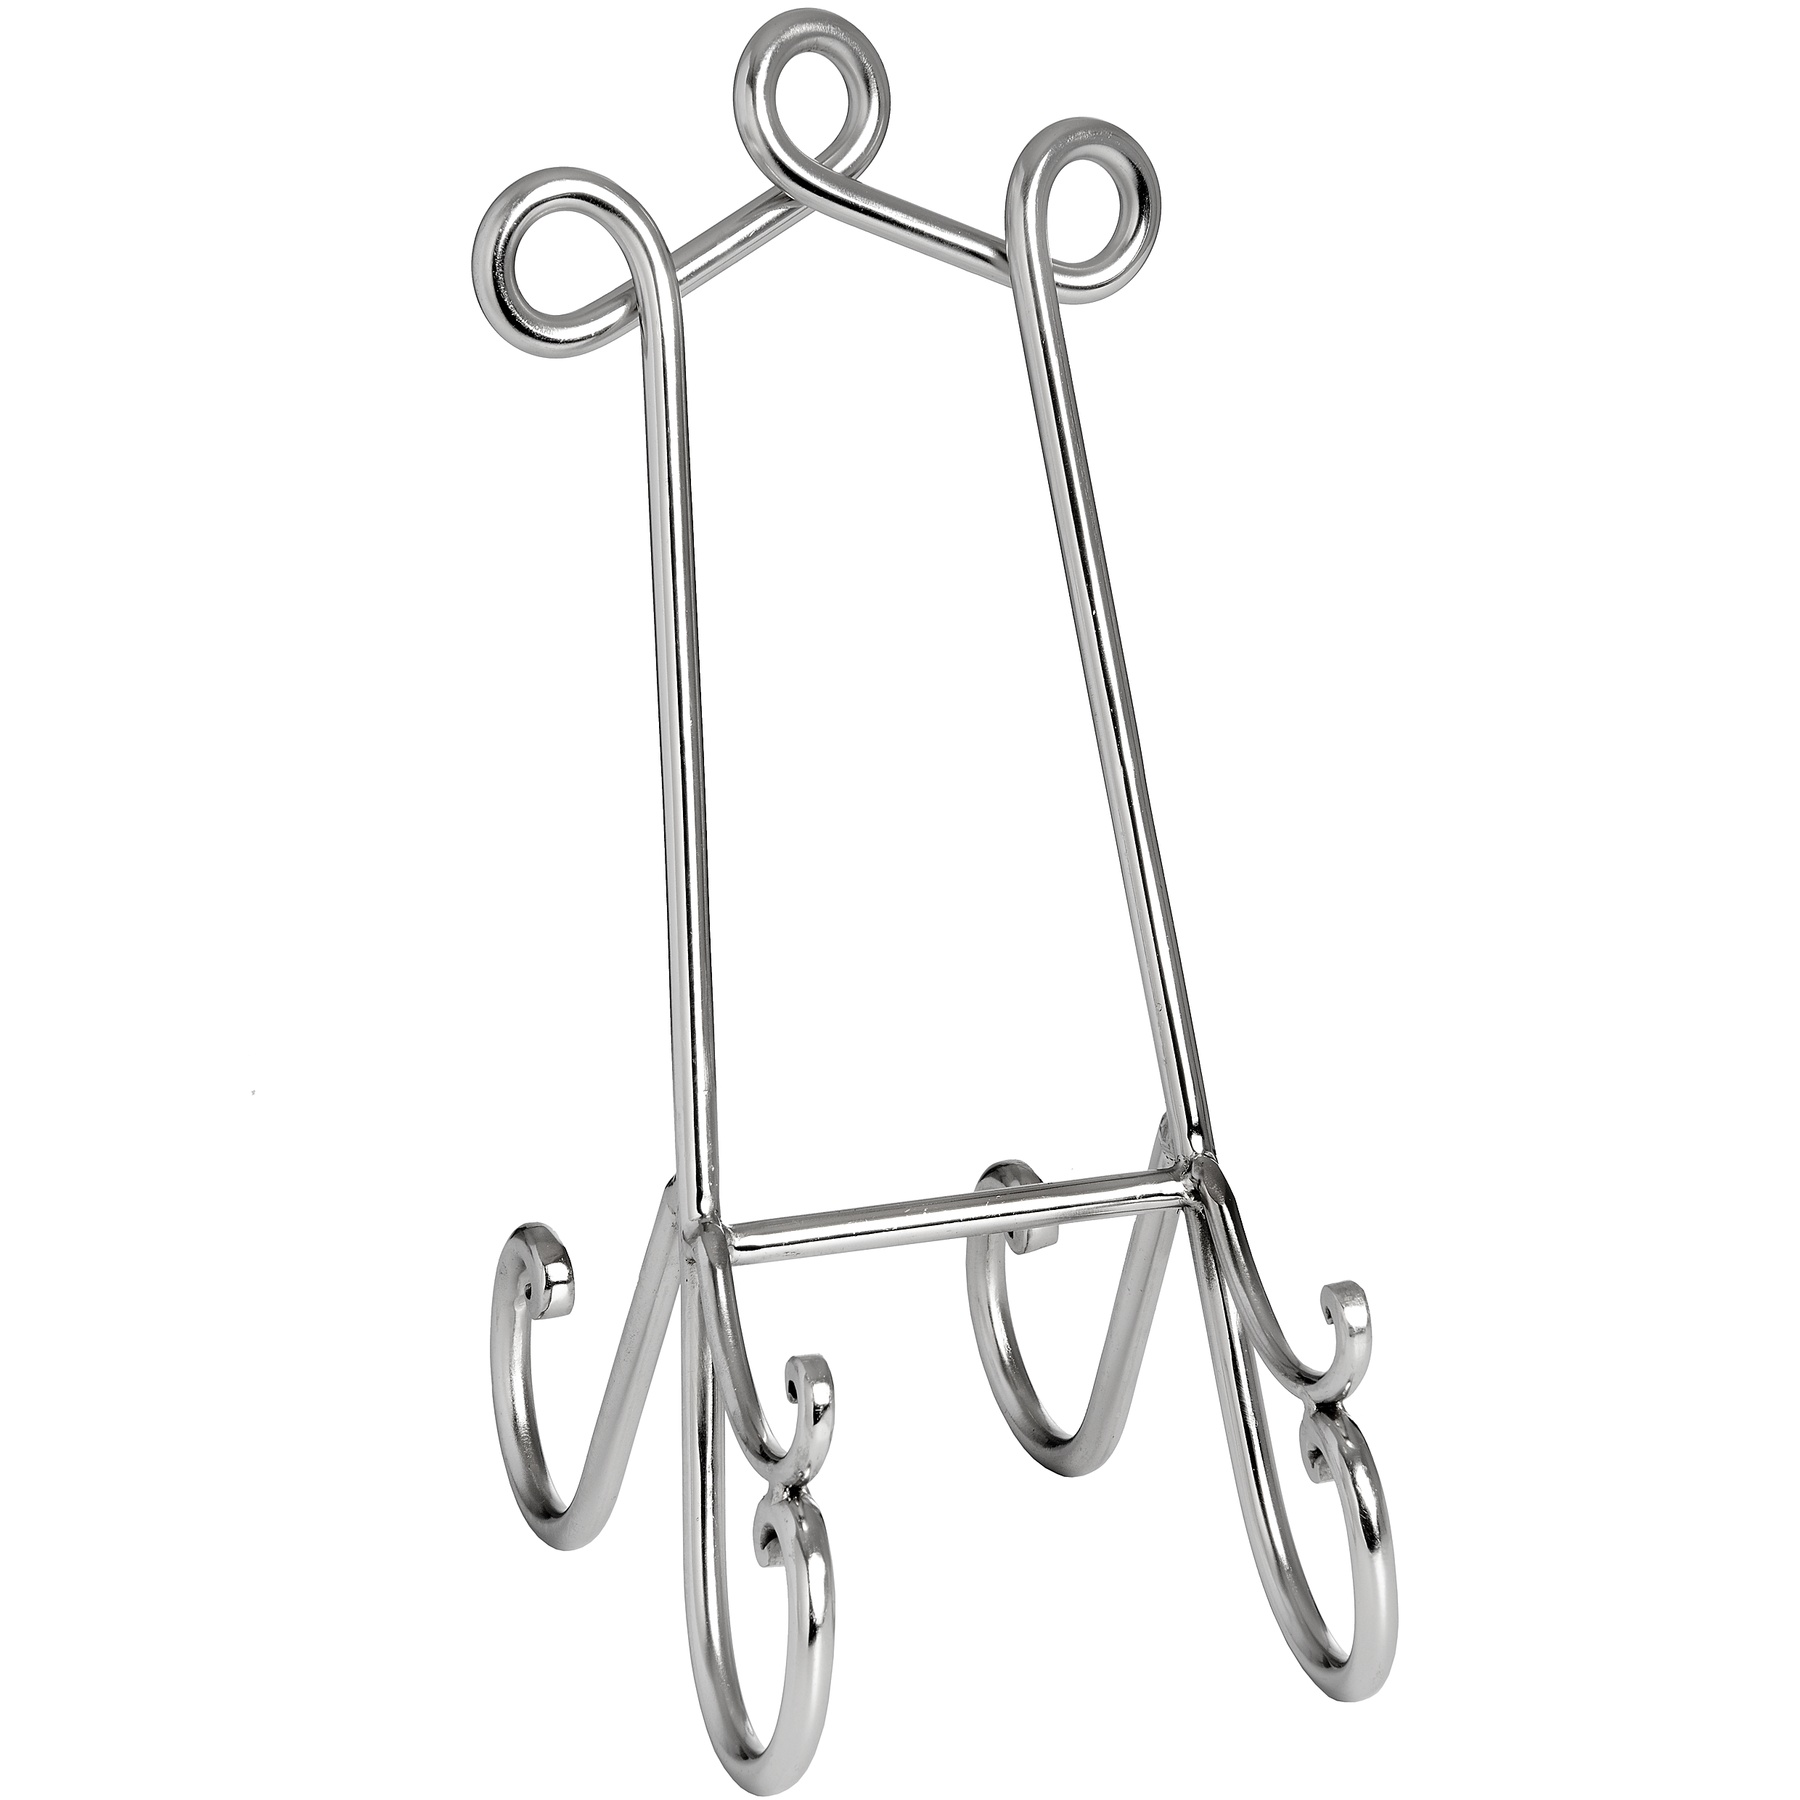 Small Nickel Easel - Image 1